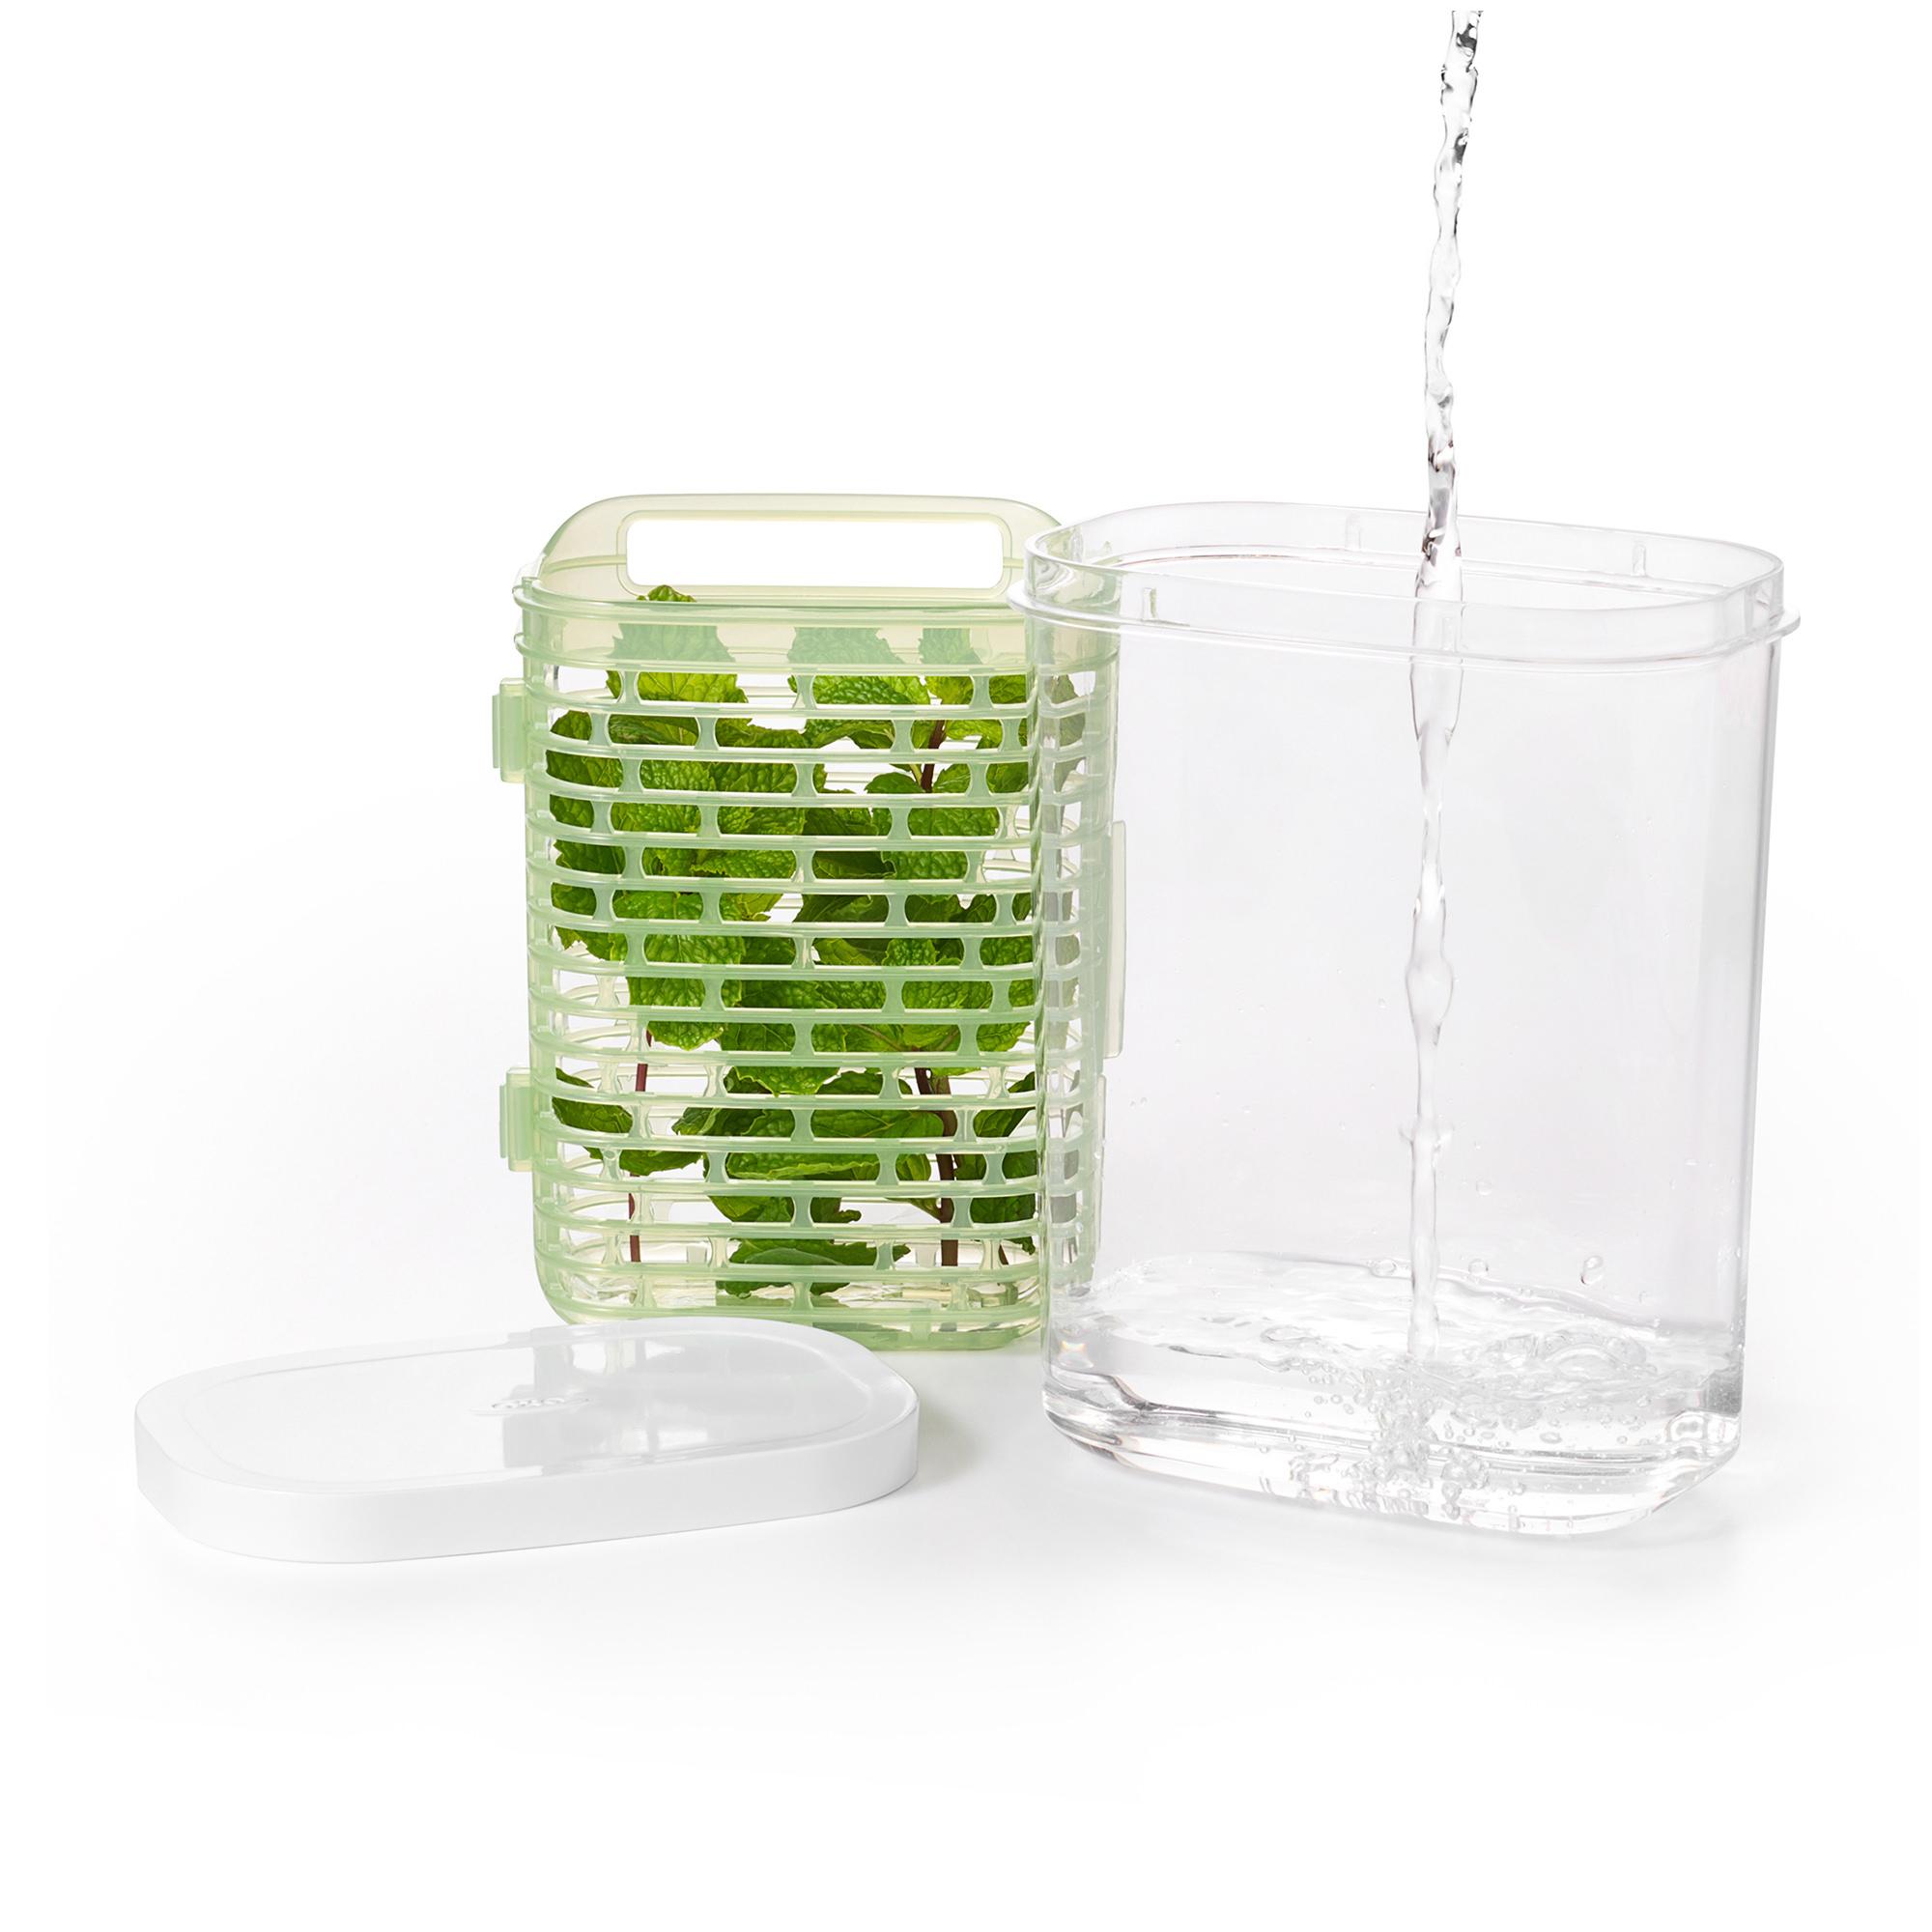 OXO Good Grips GreenSaver Herb Keeper 1.7L Image 4